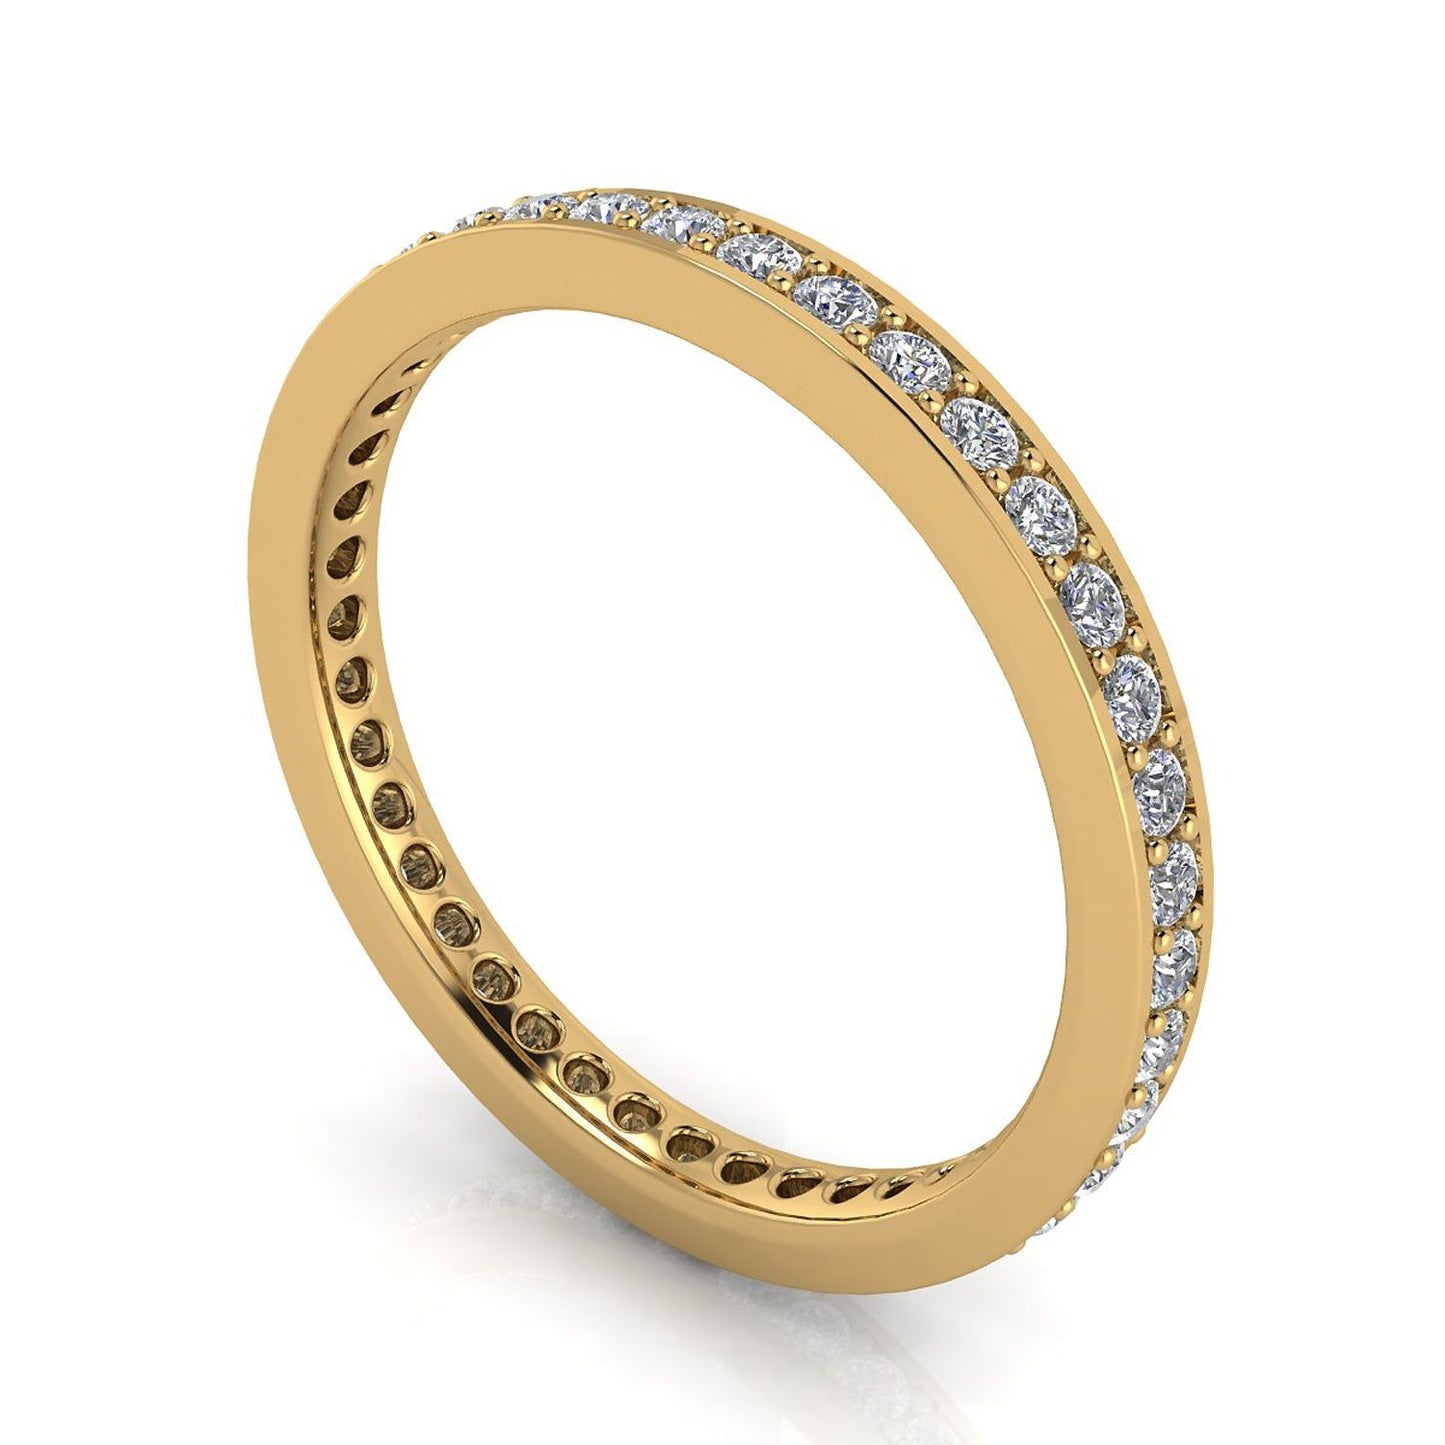 Round Brilliant Cut Diamond Channel Pave Set Eternity Ring In 18k Yellow Gold  (0.29ct. Tw.) Ring Size 4.5